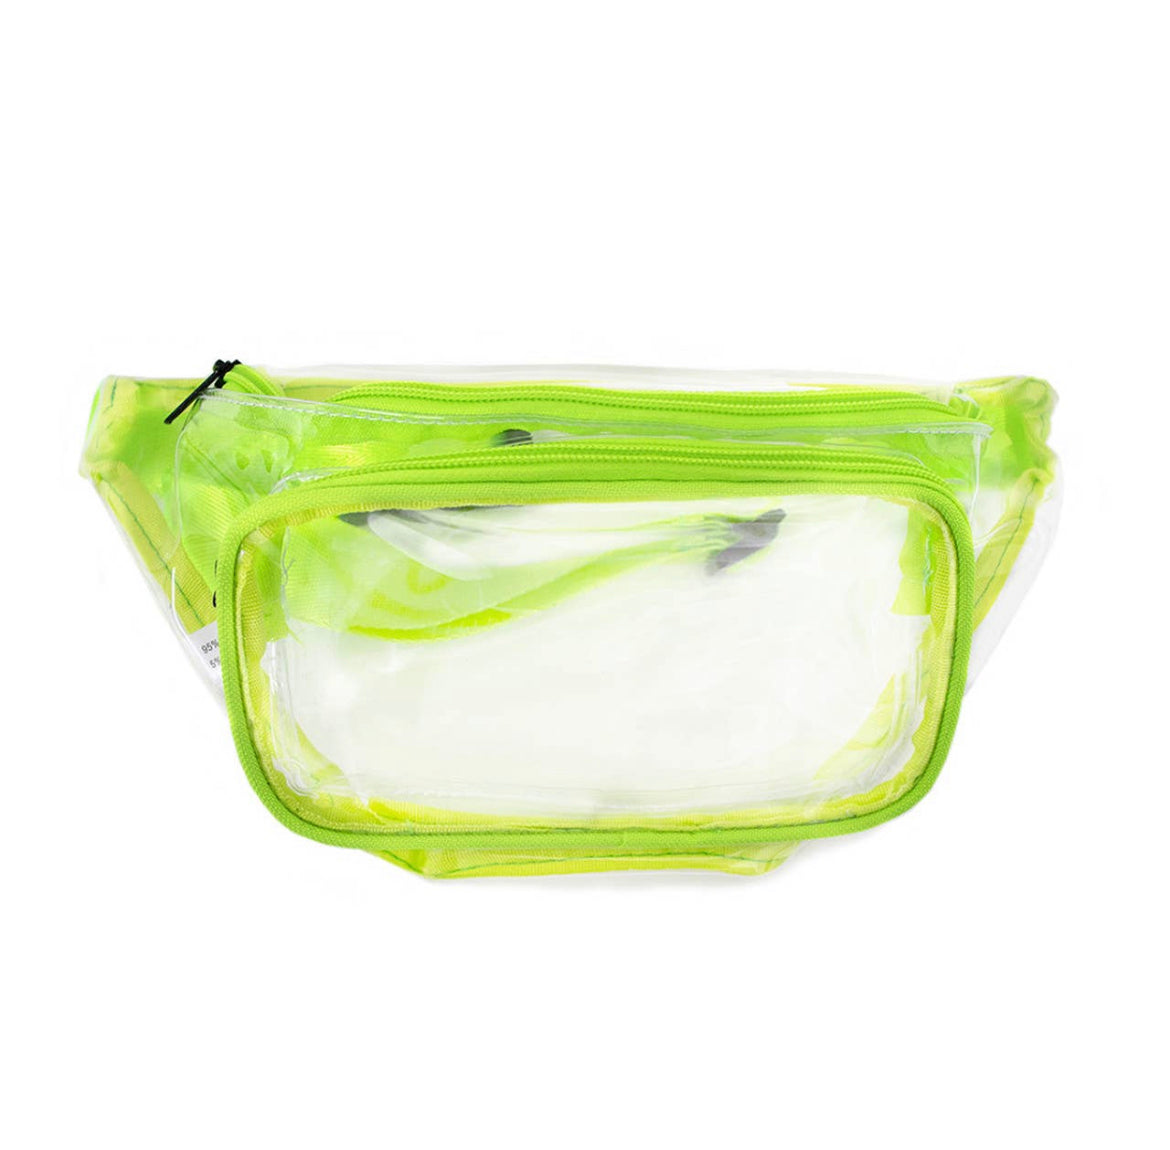 Clear Fanny pack